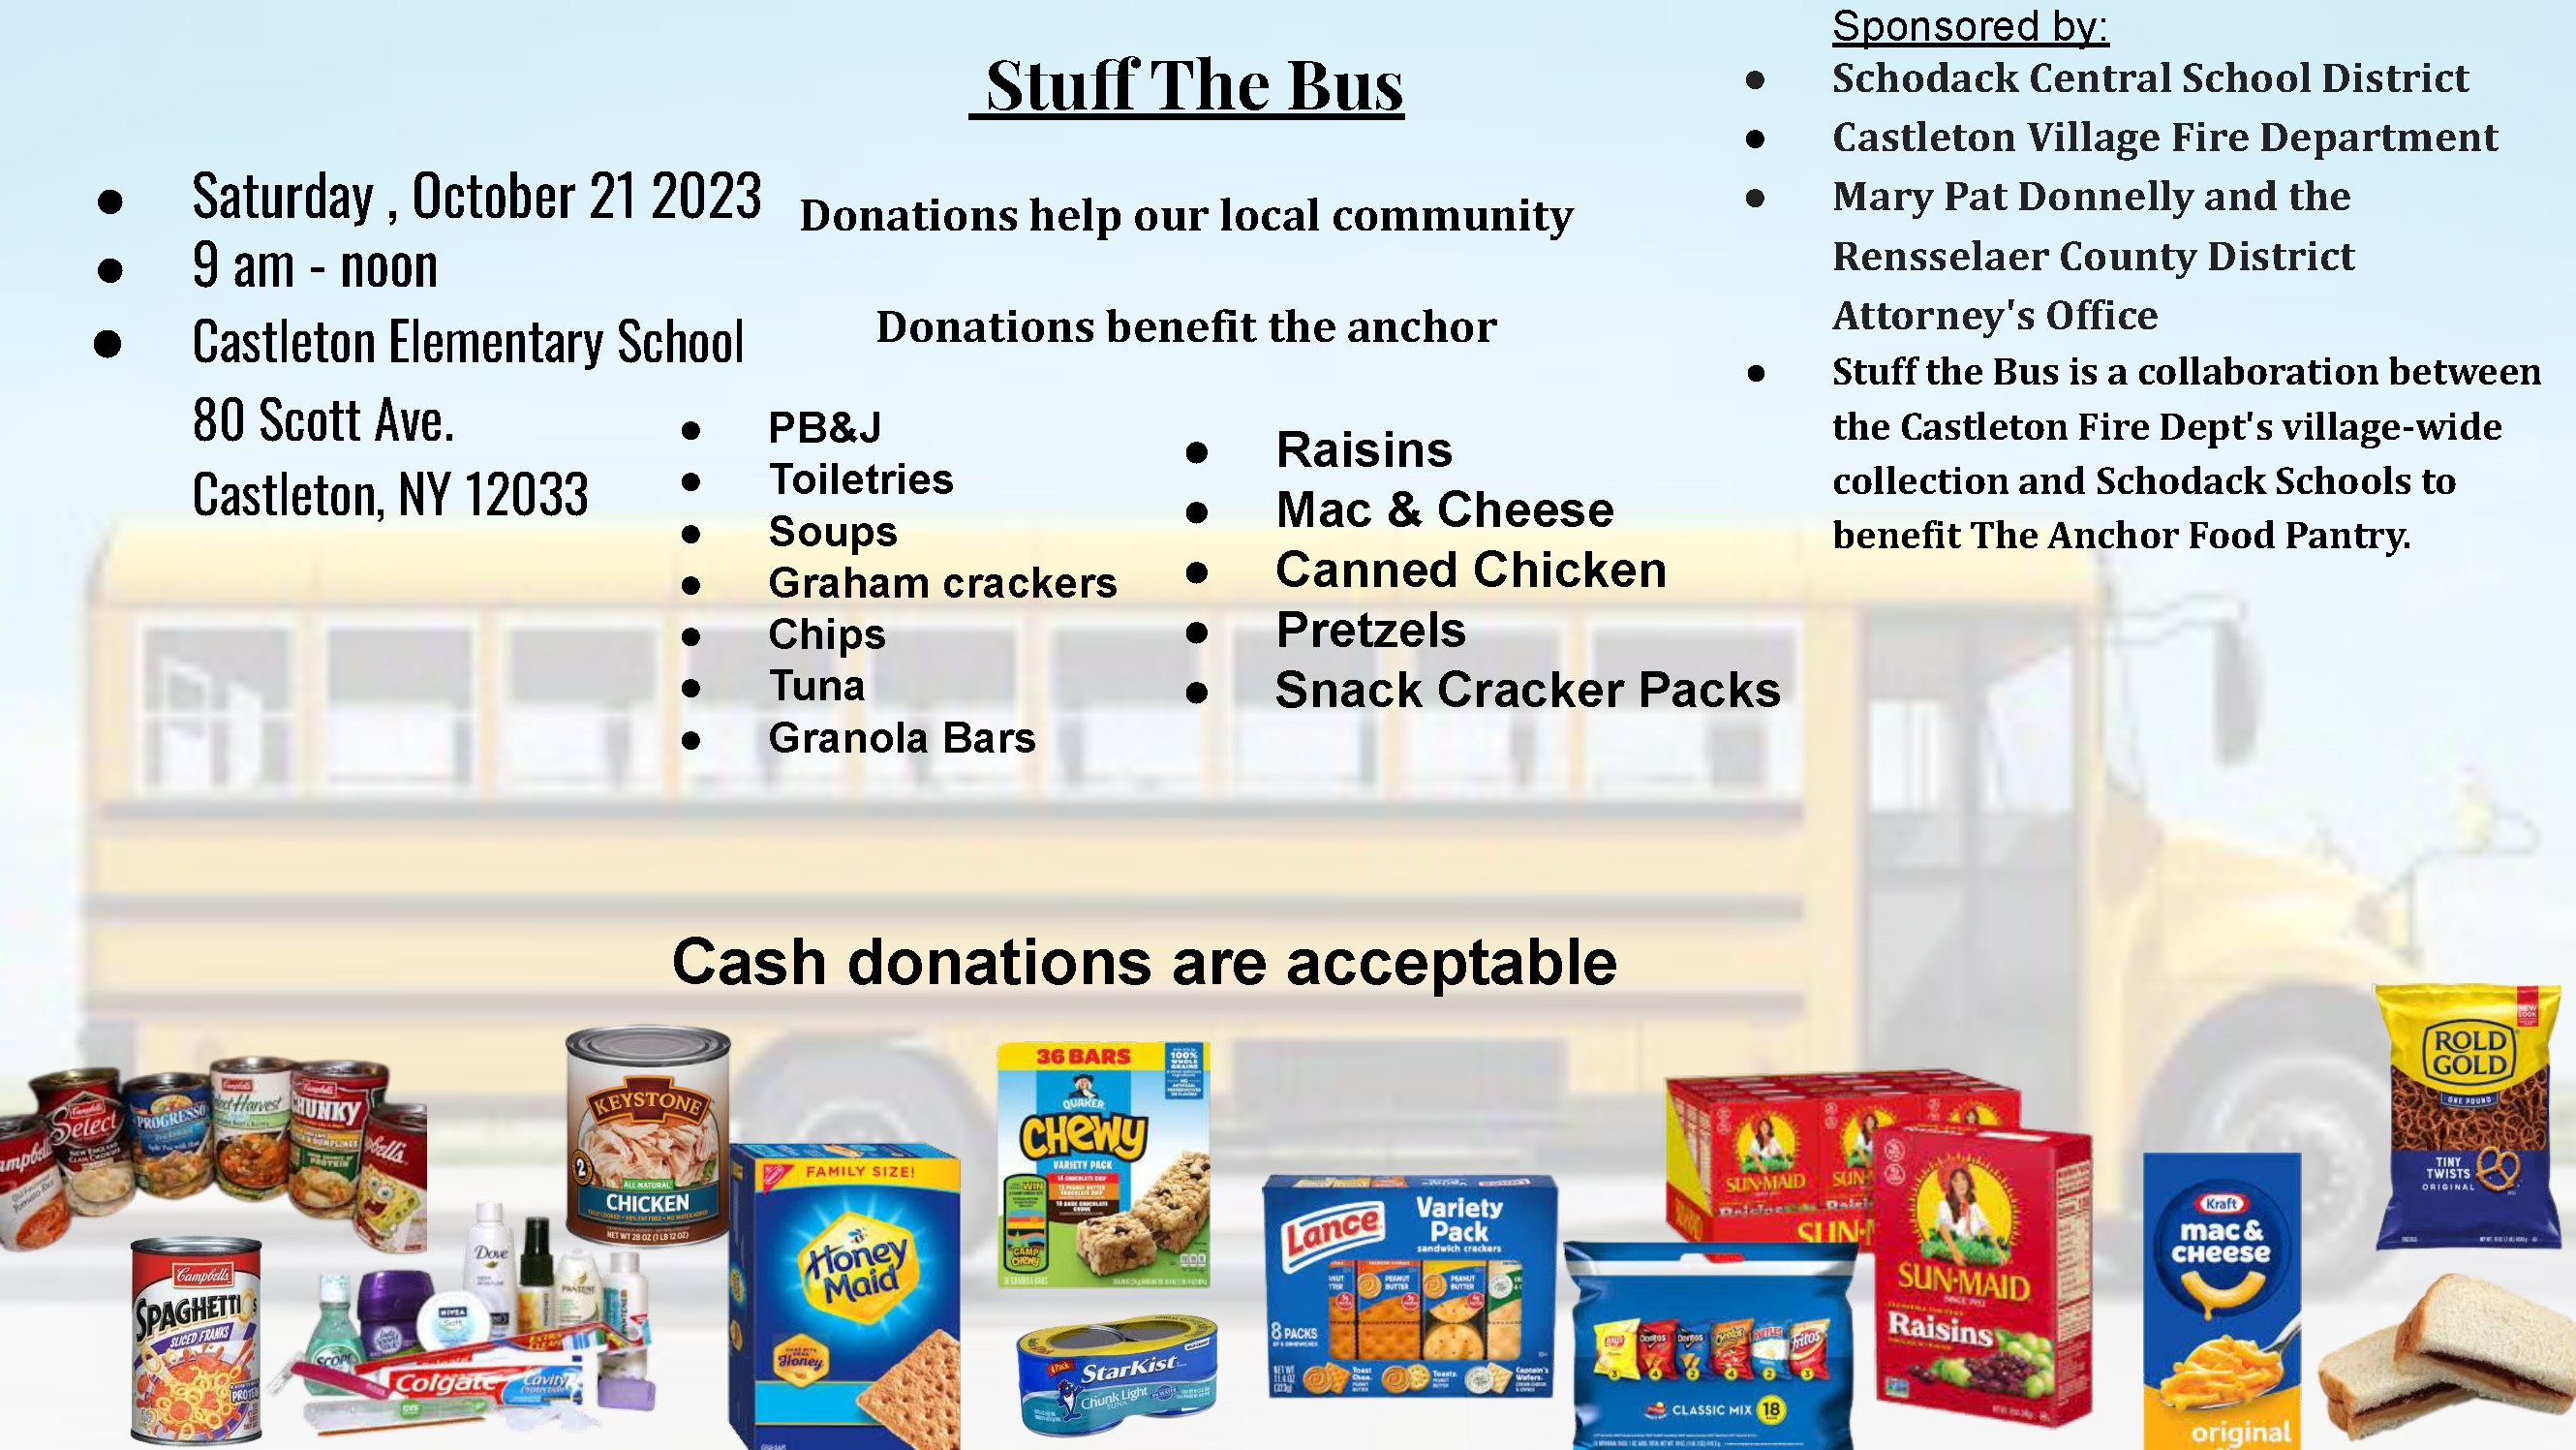 Flyer for Stuff the Bus Food Drive on October 21 2023